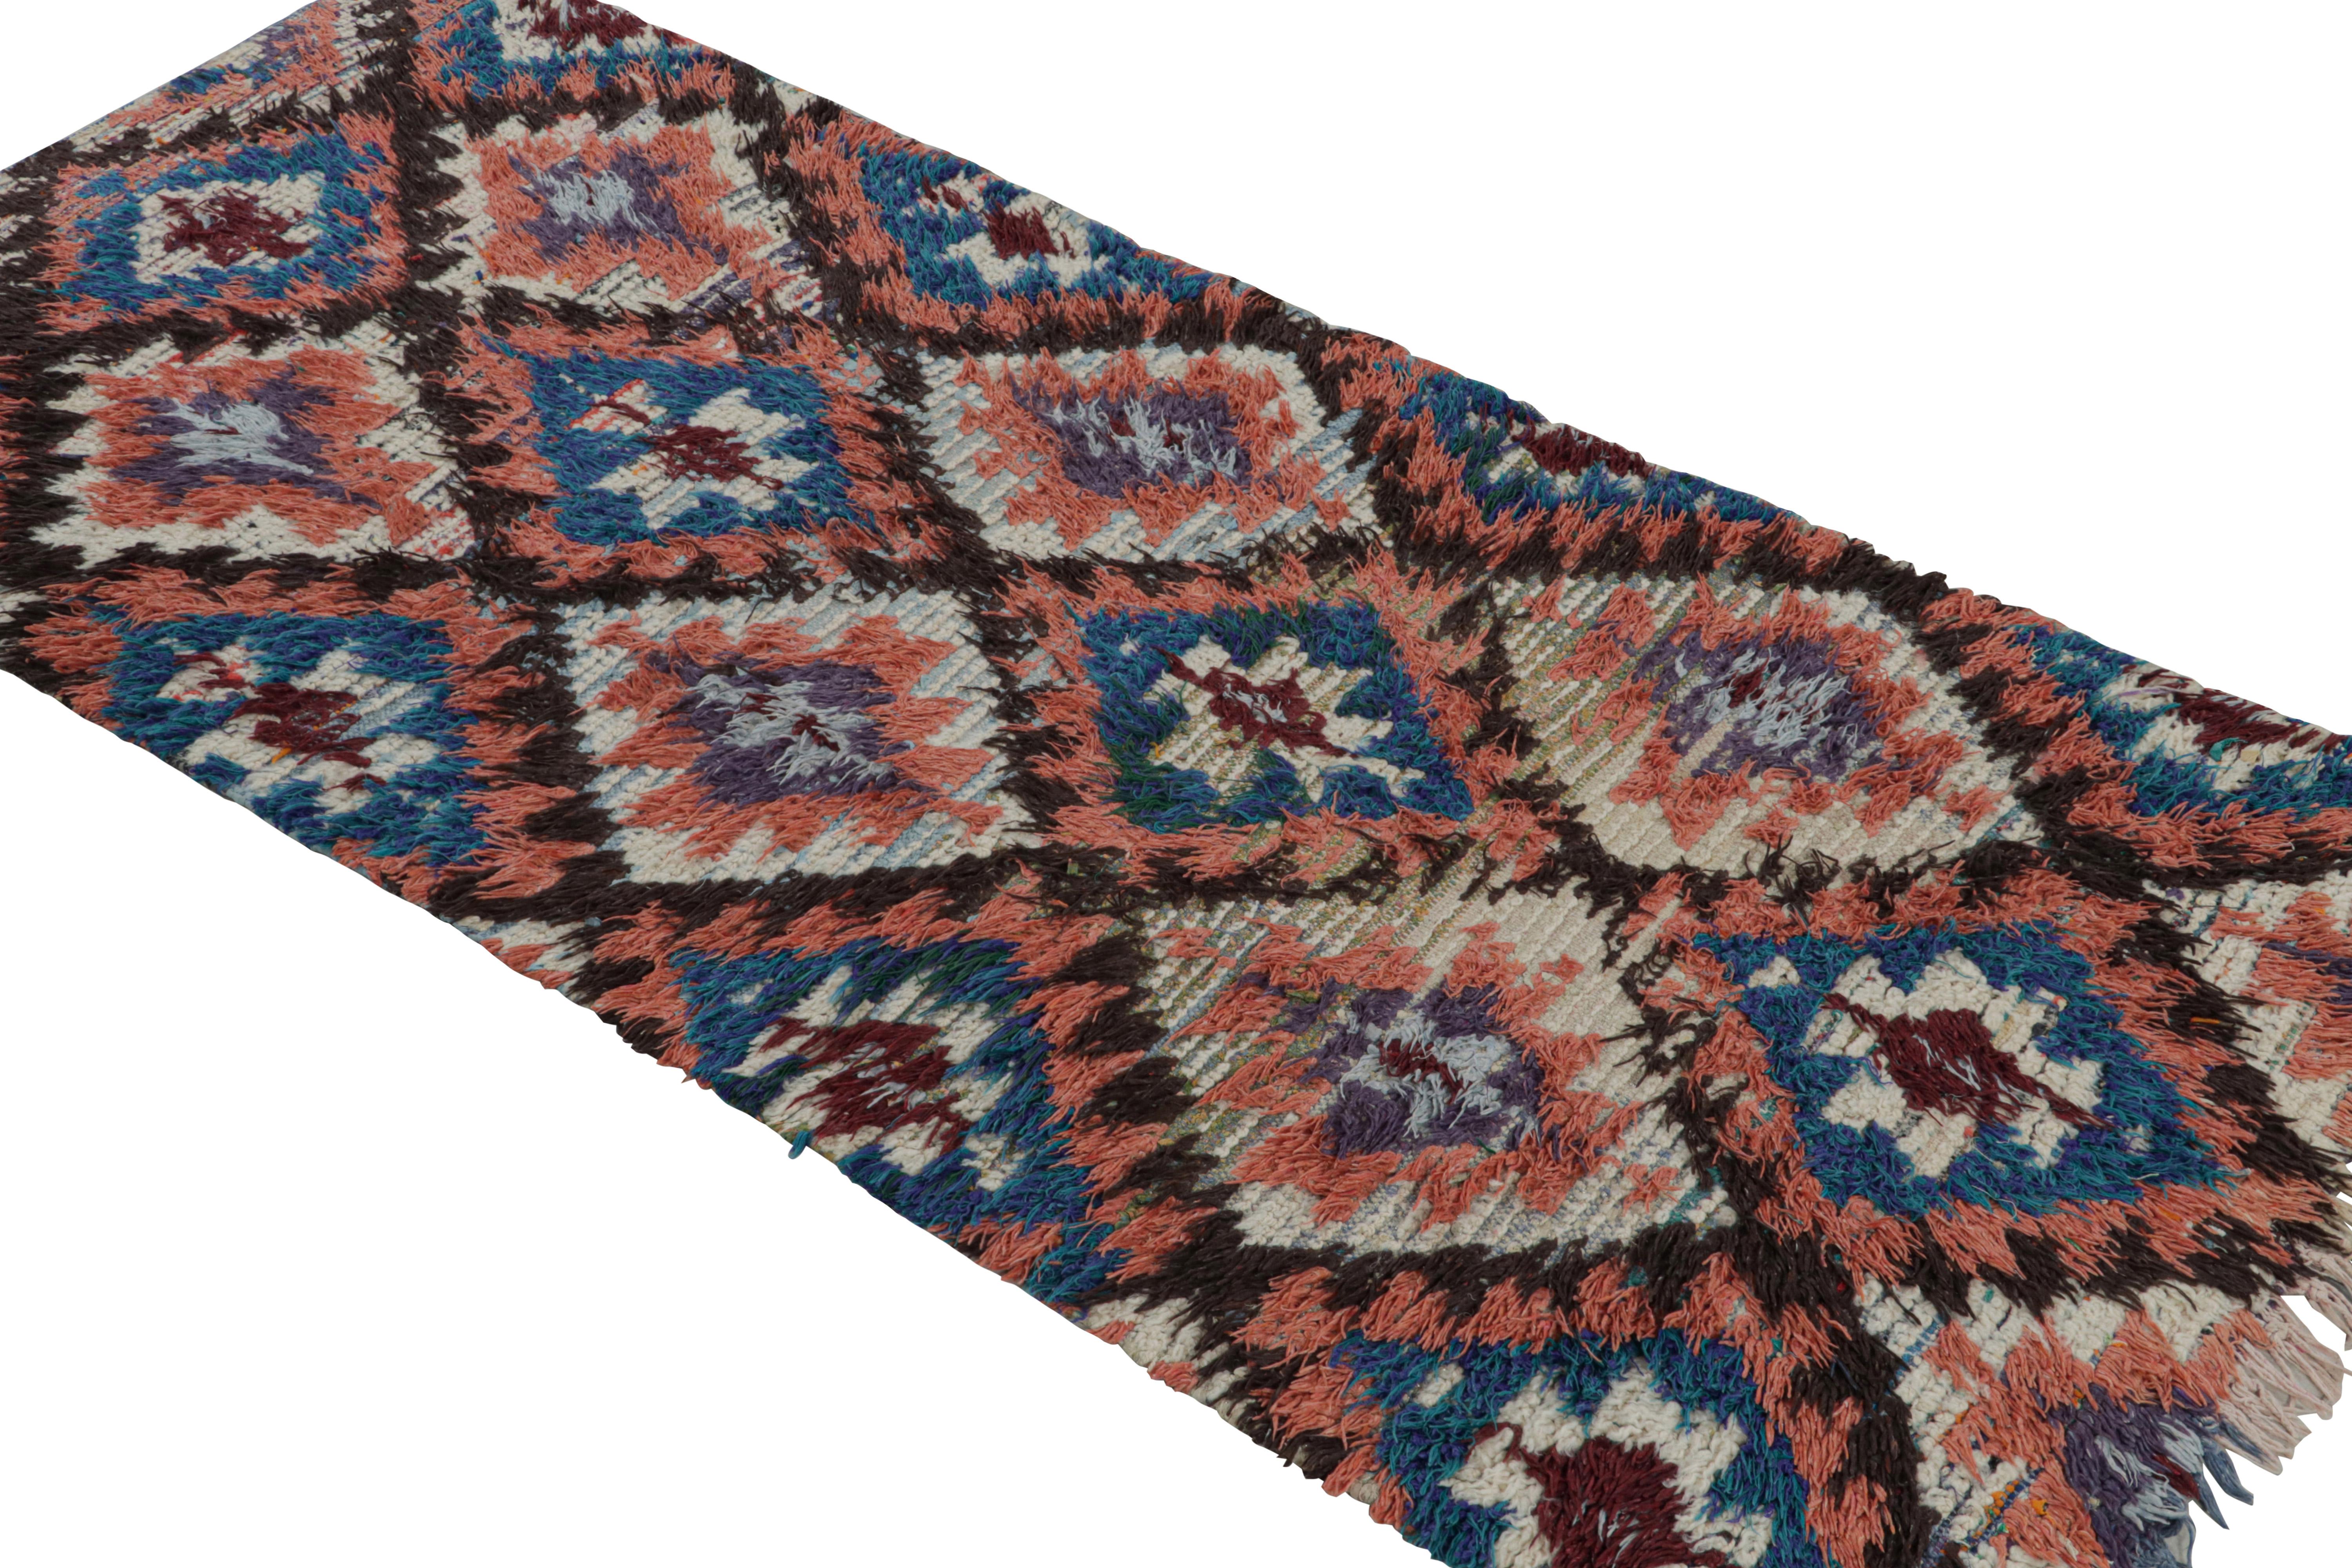 Hand-knotted in wool, circa 1950-1960, this 3x6 vintage Moroccan runner rug is believed to hail from the Azilal tribe. 

On the Design: 

This piece enjoys a lush high pile with polychromatic primitivist Berber geometric diamond medallion or